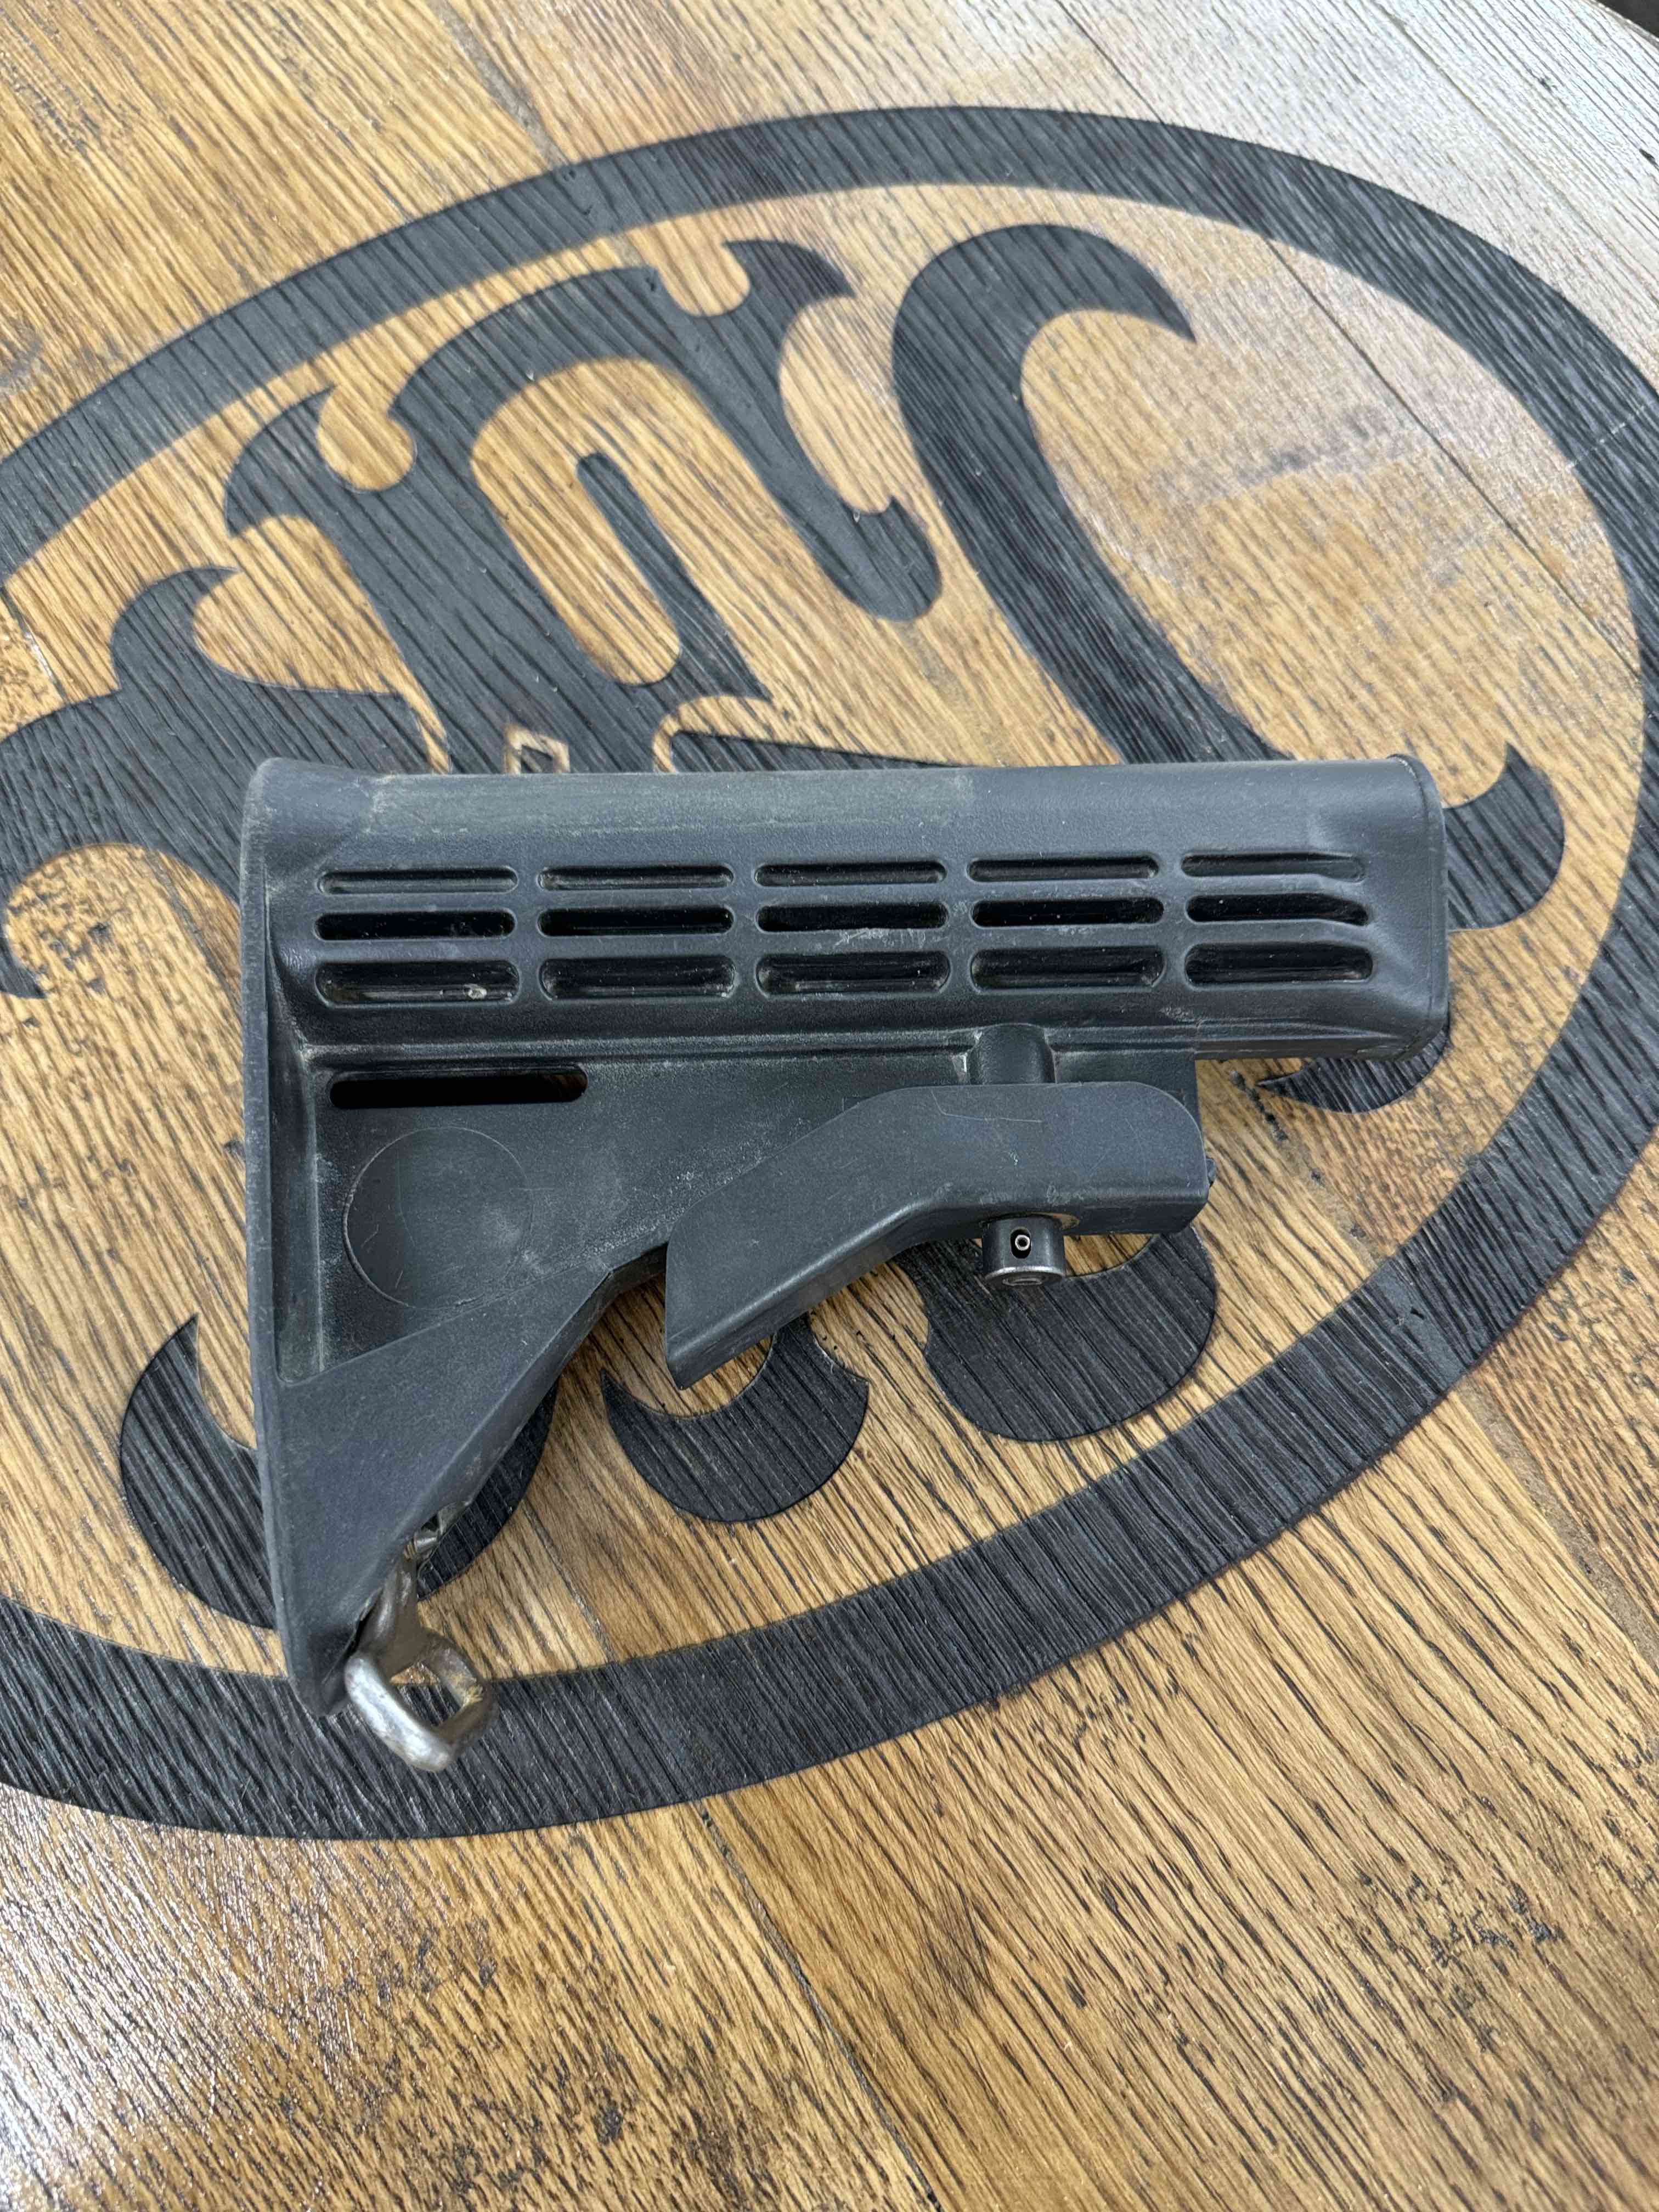 FN Cage Code Marked Waffle Stock